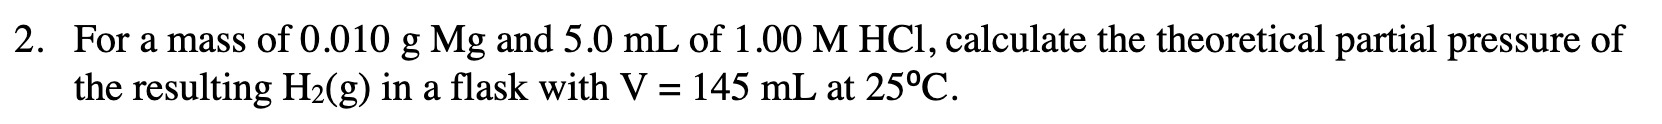 2. For a mass of 0.010 g Mg and 5.0 mL of 1.00 M HCl, calculate the theoretical partial pressure of
the resulting H2(g) in a flask with V = 145 mL at 25°C
